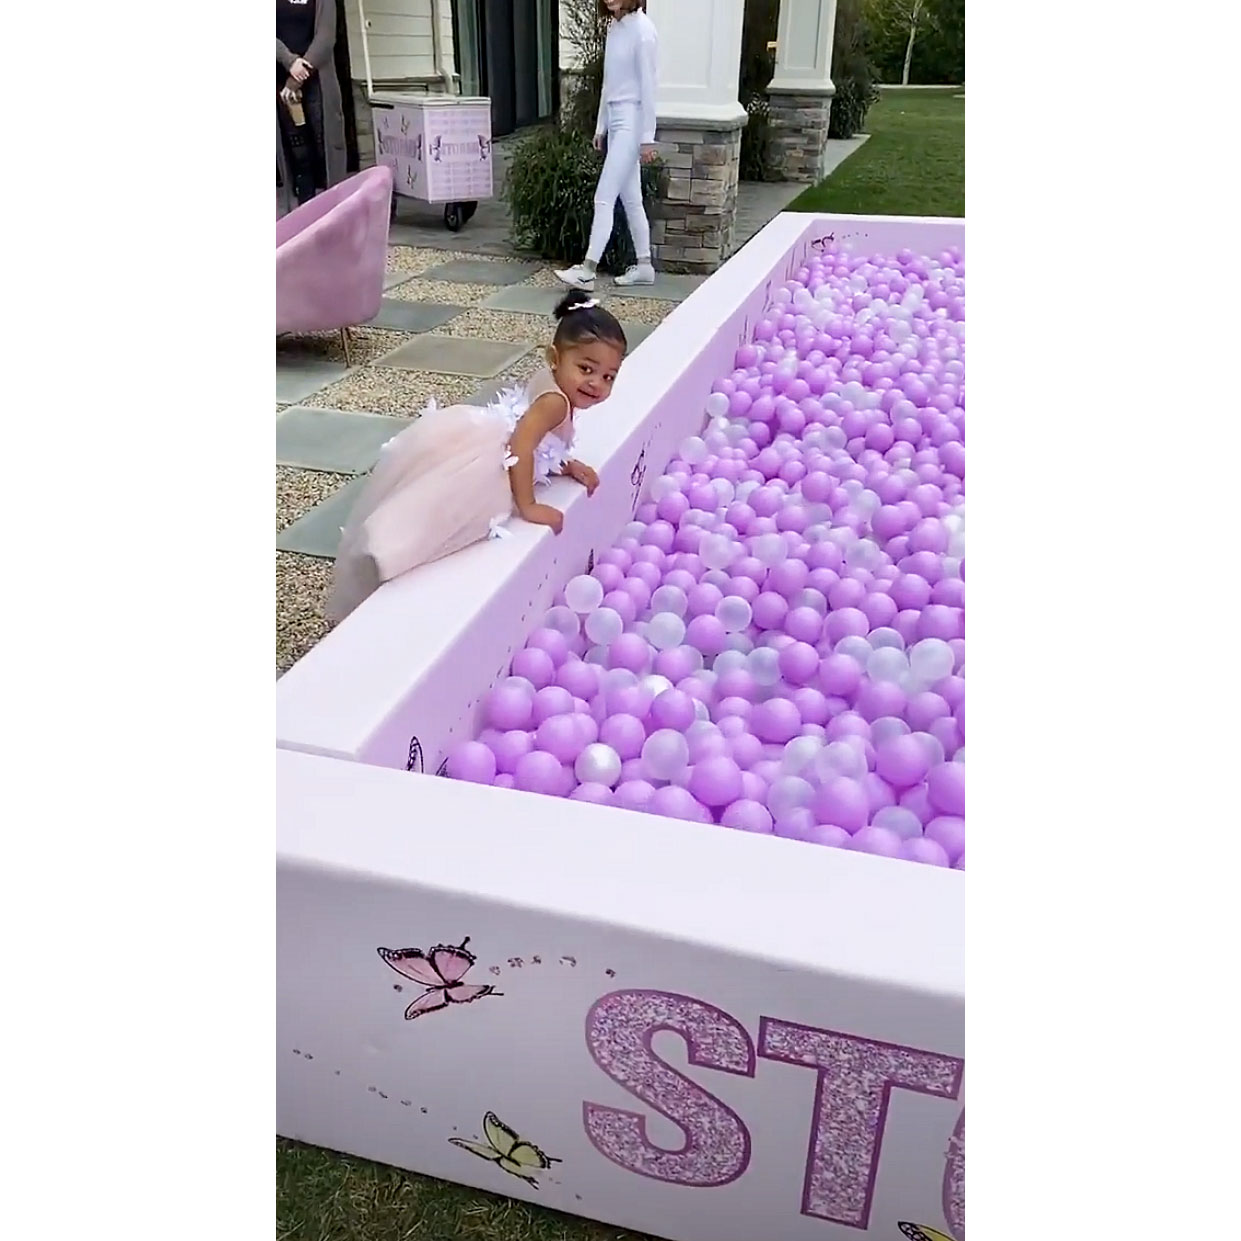 Inside Kylie Jenner's Stormi Collection Party